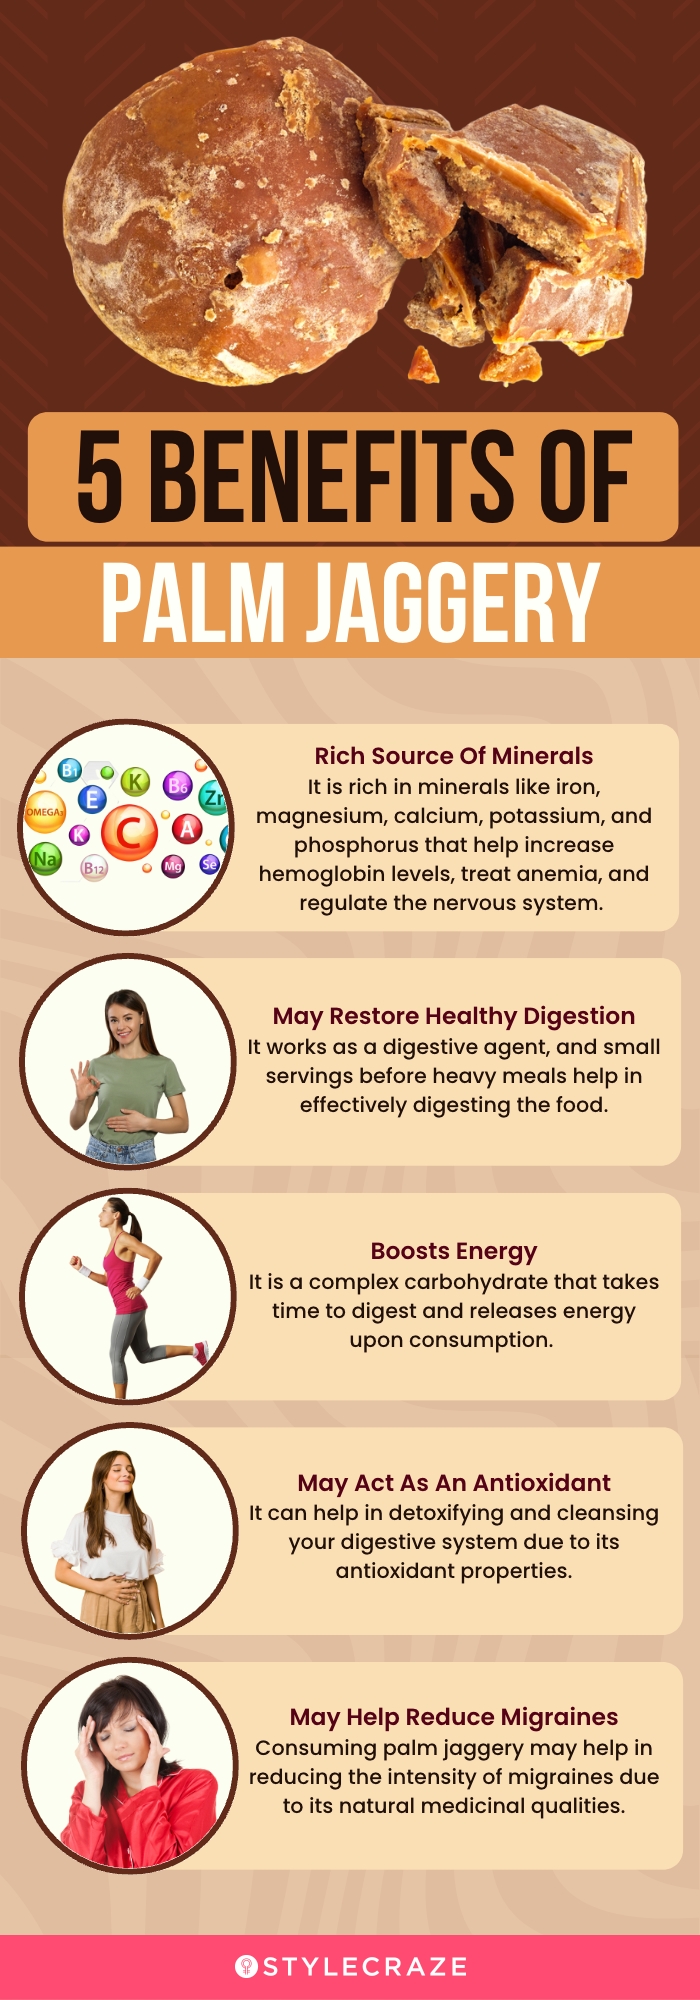 5 benefits of palm jaggery [infographic]